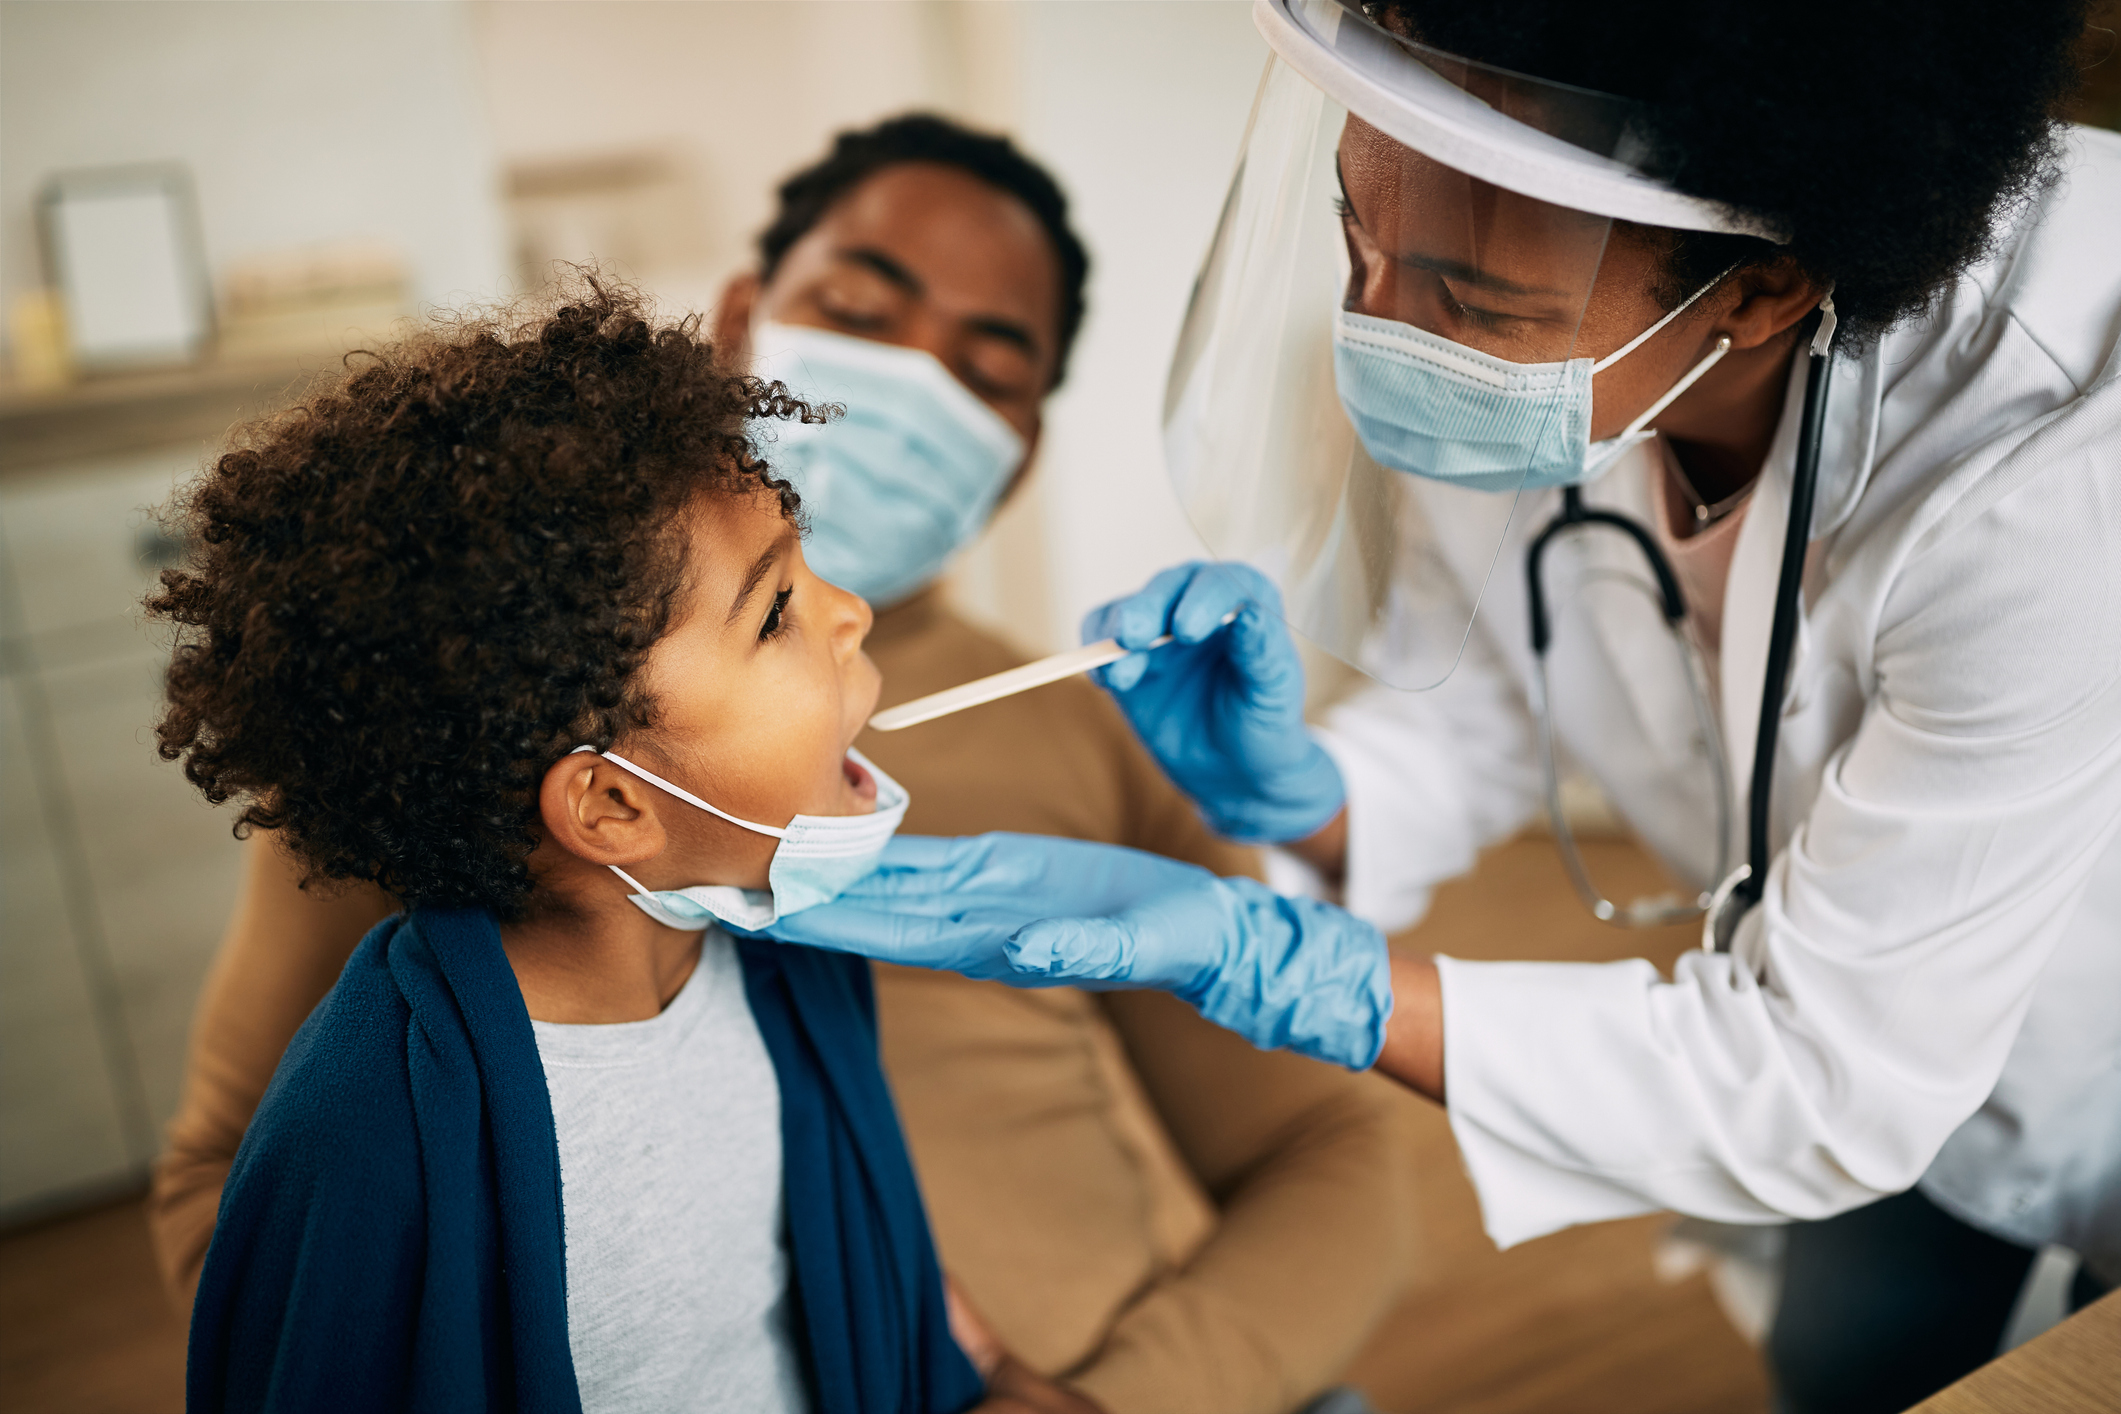 doctor with face mask examining boy's throat during a home visit.